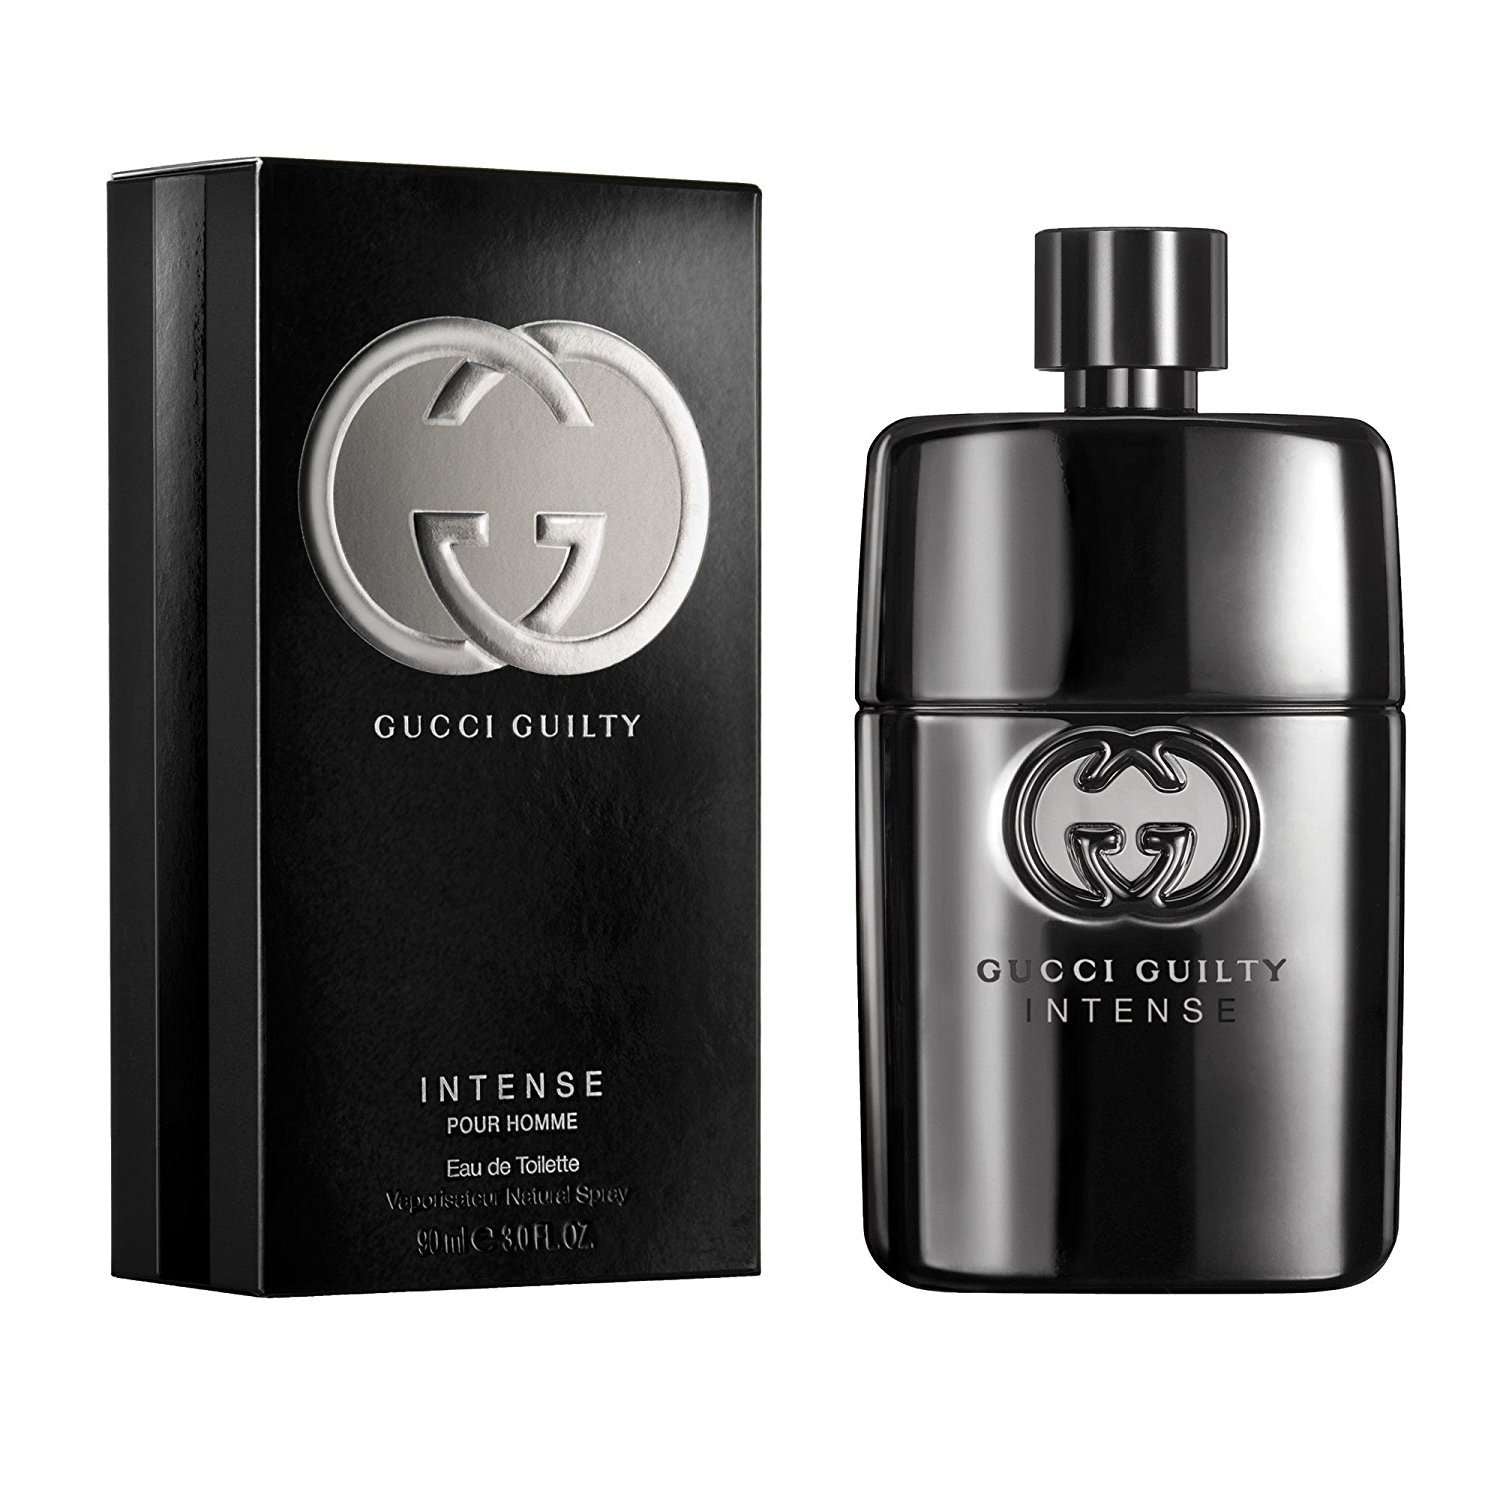 Gucci Guilty Intense Cologne for Men in 